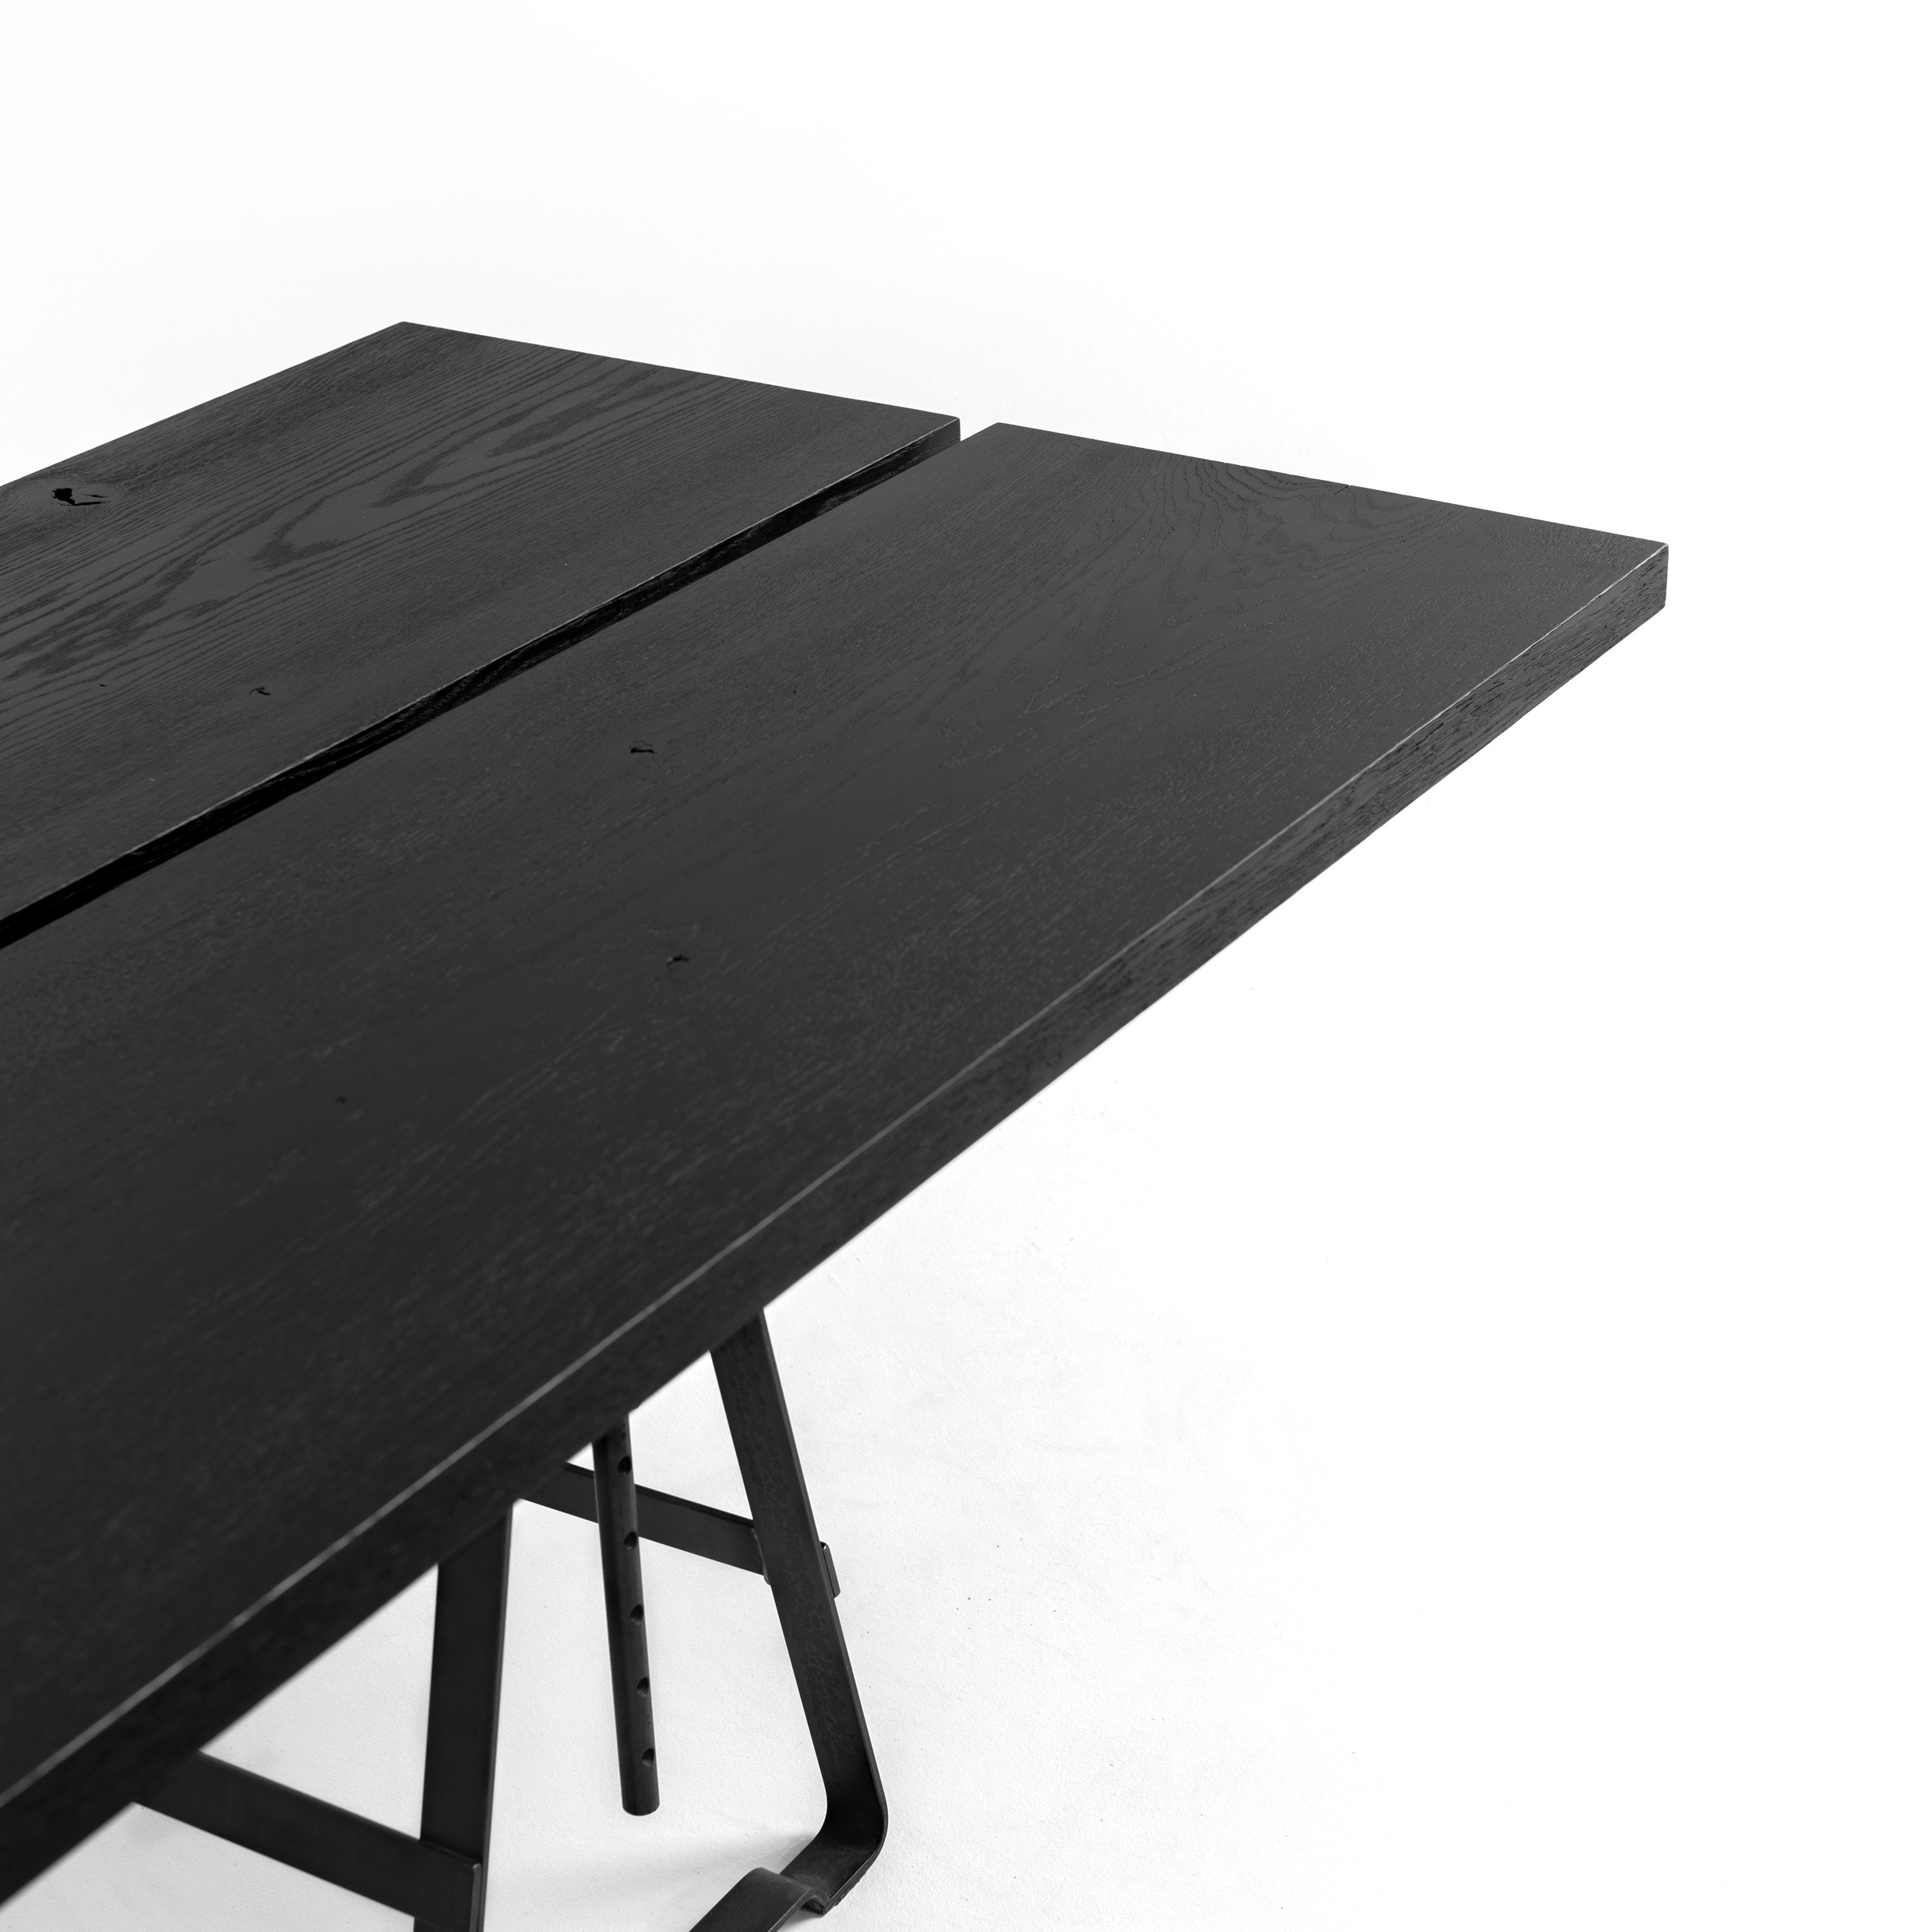 FORM EXCLUSIVE // JOON - IN-/OUTDOOR TABLE | BLACK CARED - 240CM X 45CM X 5CM - PAINT MONKEY BLACK